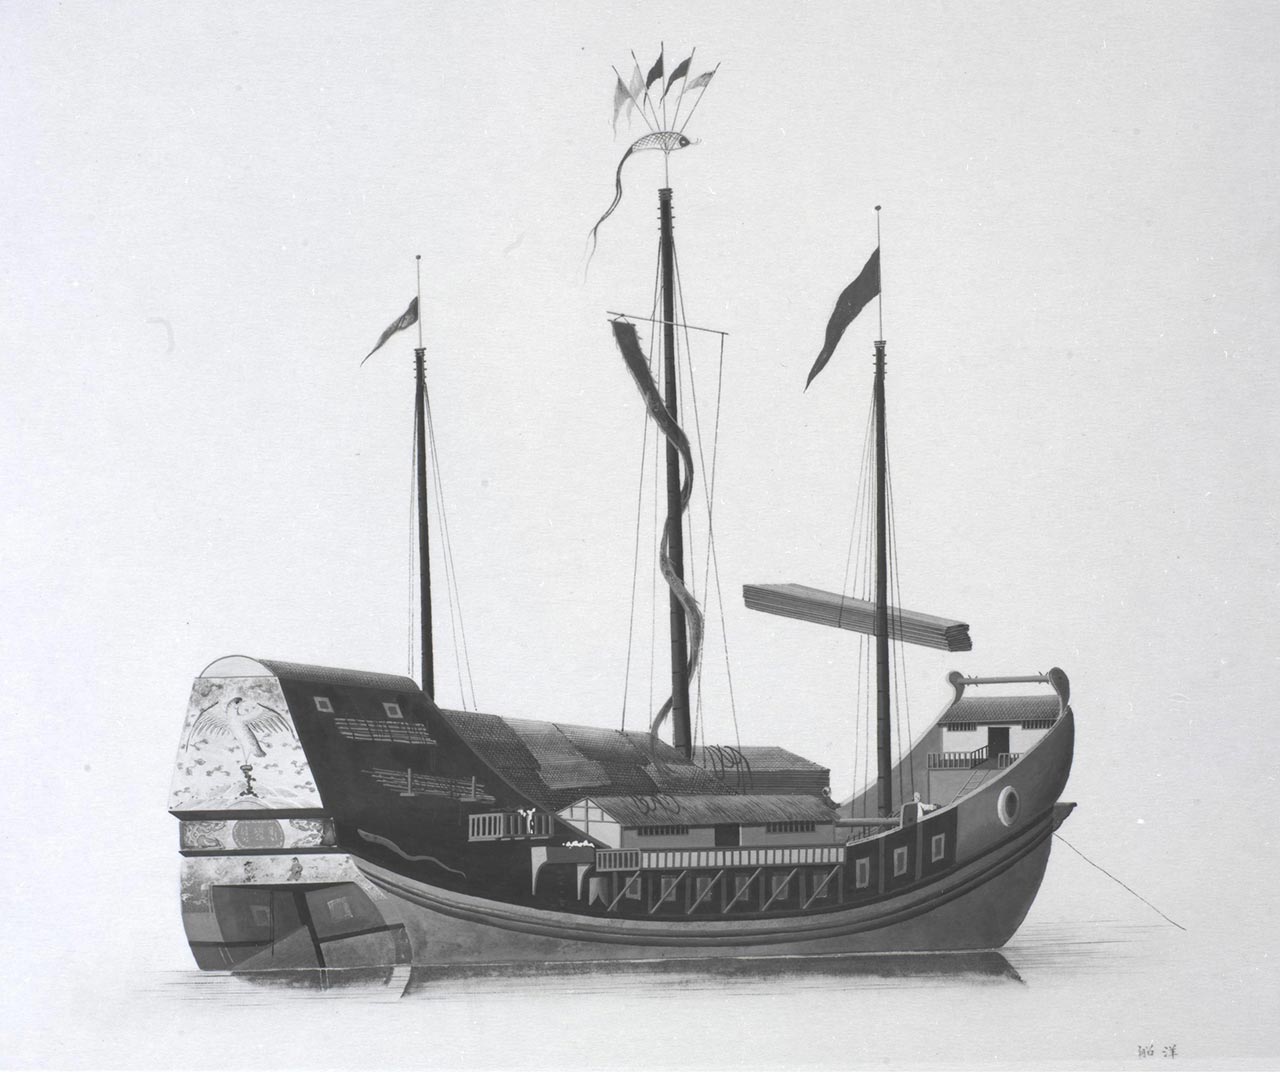 A sea-going ship, typically made of ironwood, with three masts